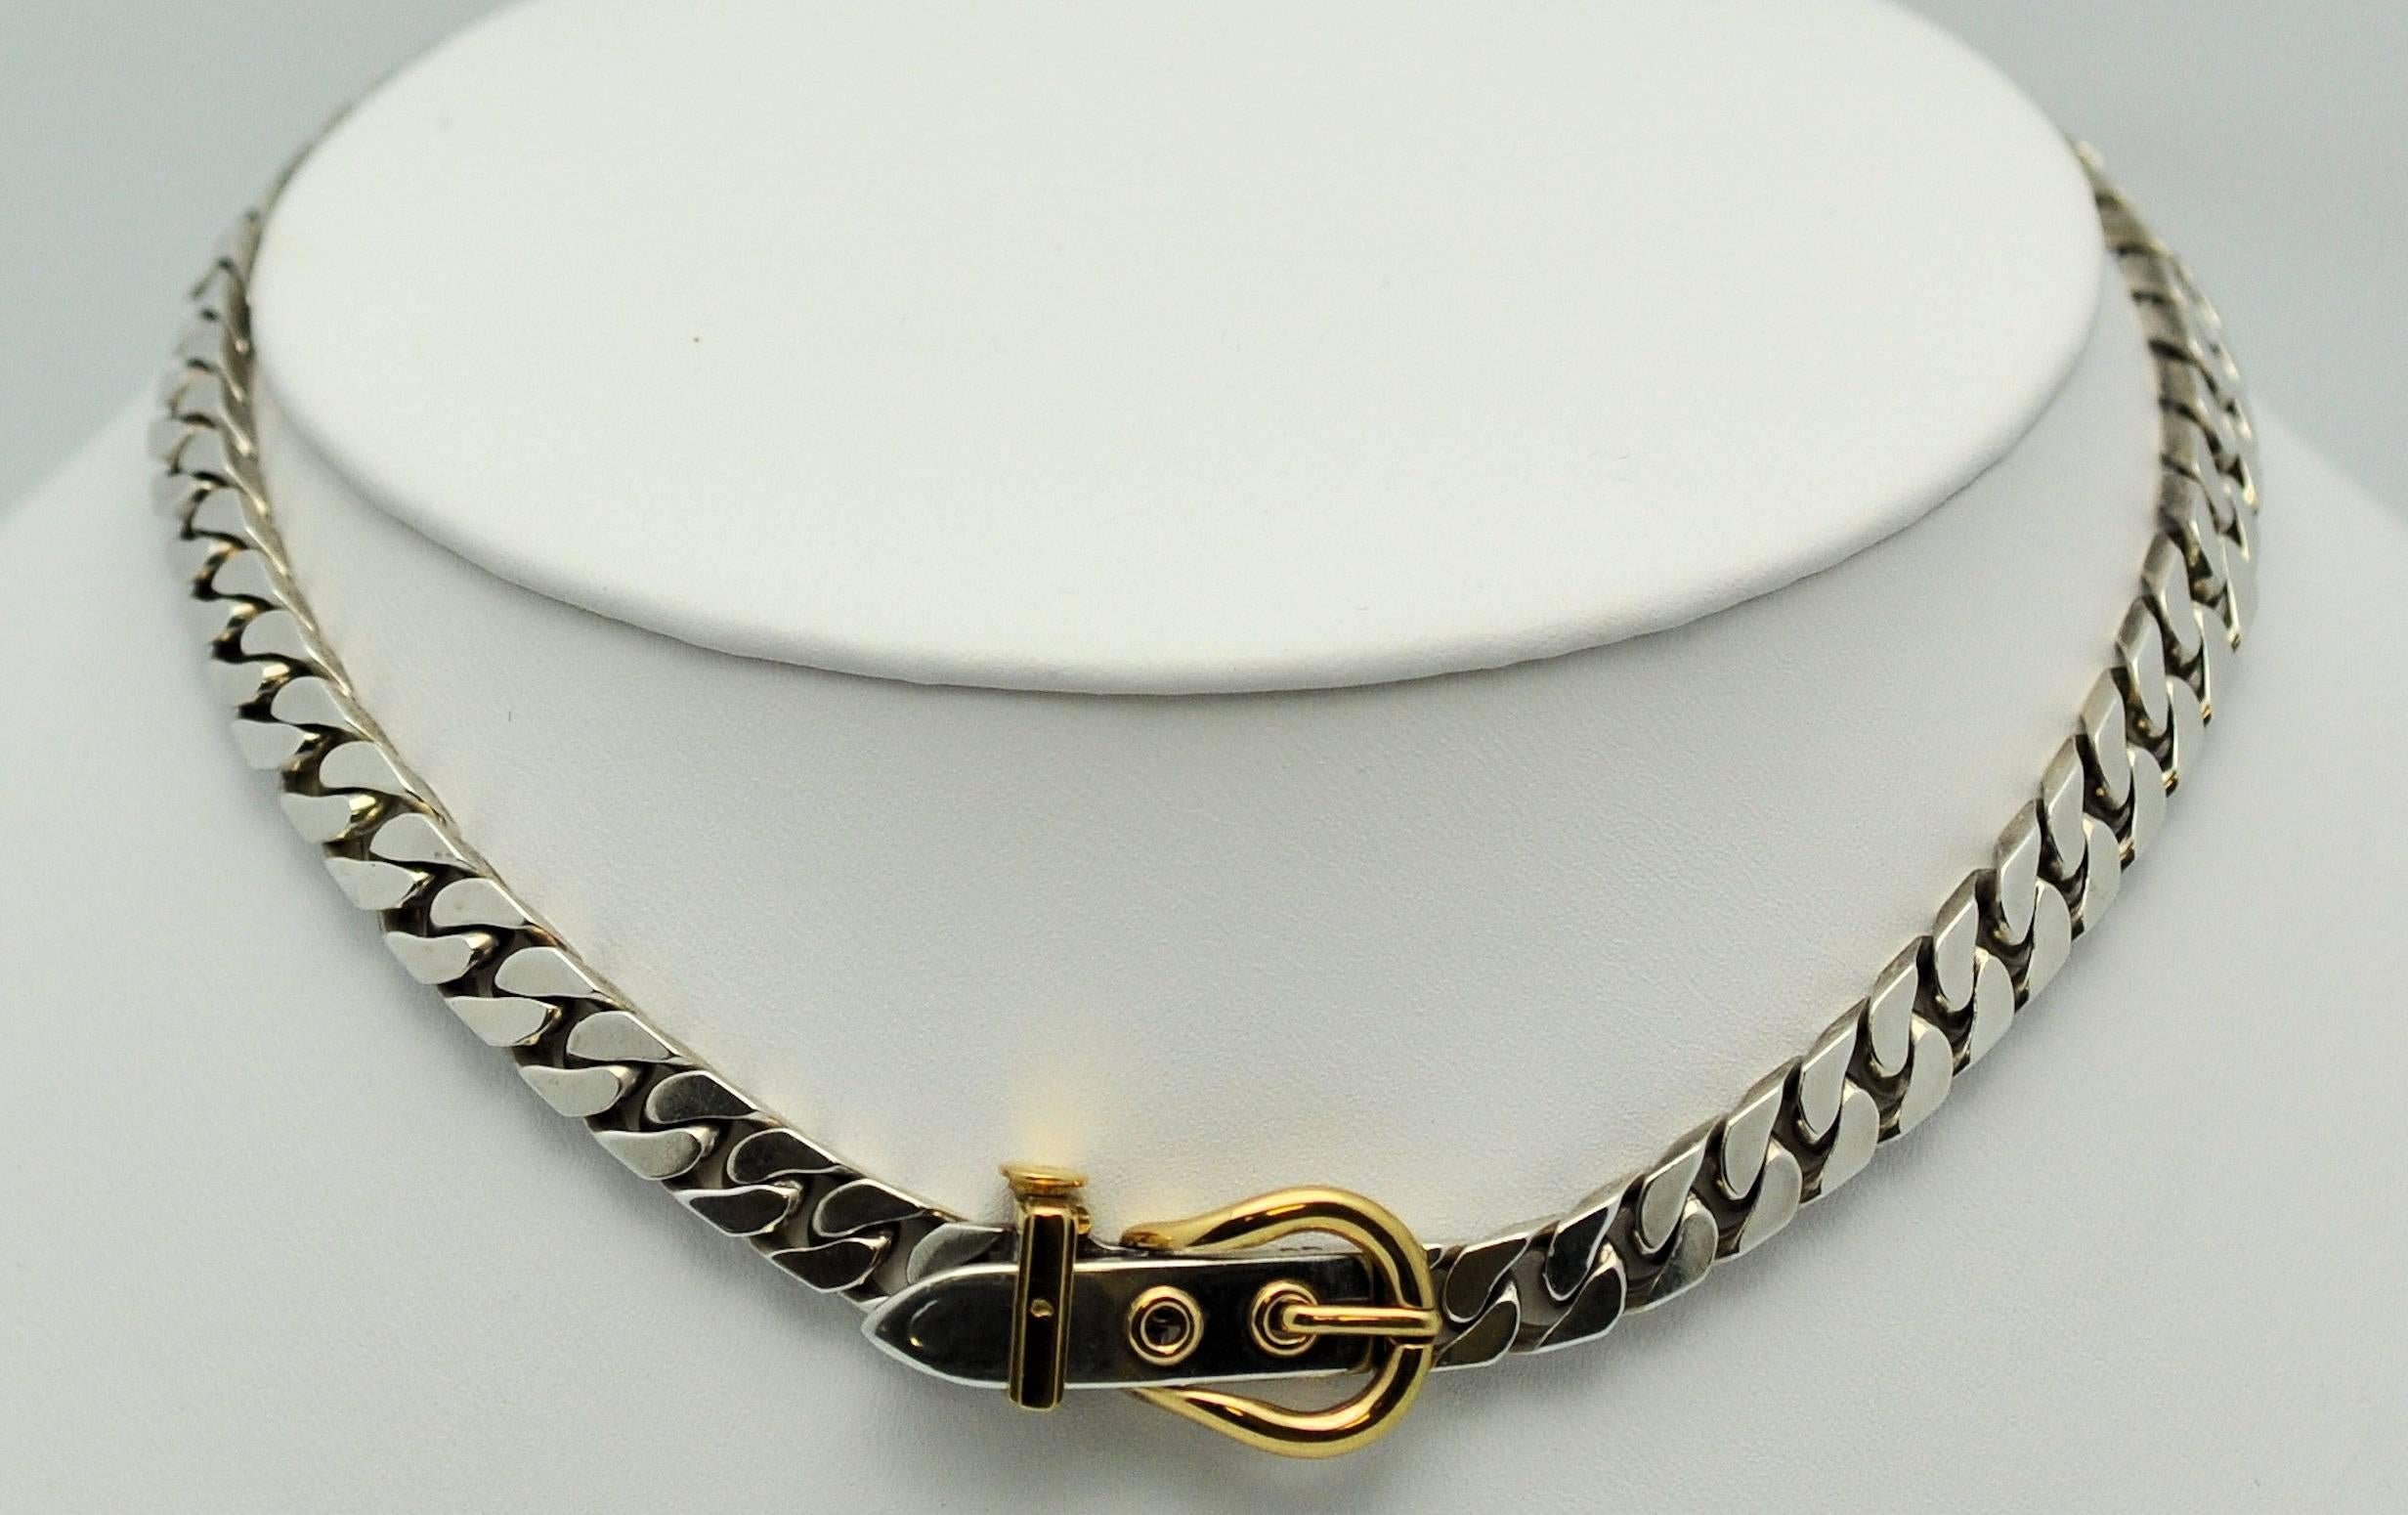 Sterling Silver and 18K yellow gold chain link necklace with buckle motif clasp by Hermes. Spring release clasp in very good working condition. All appropriate hallmarks and signature.  15.5 inches long. 